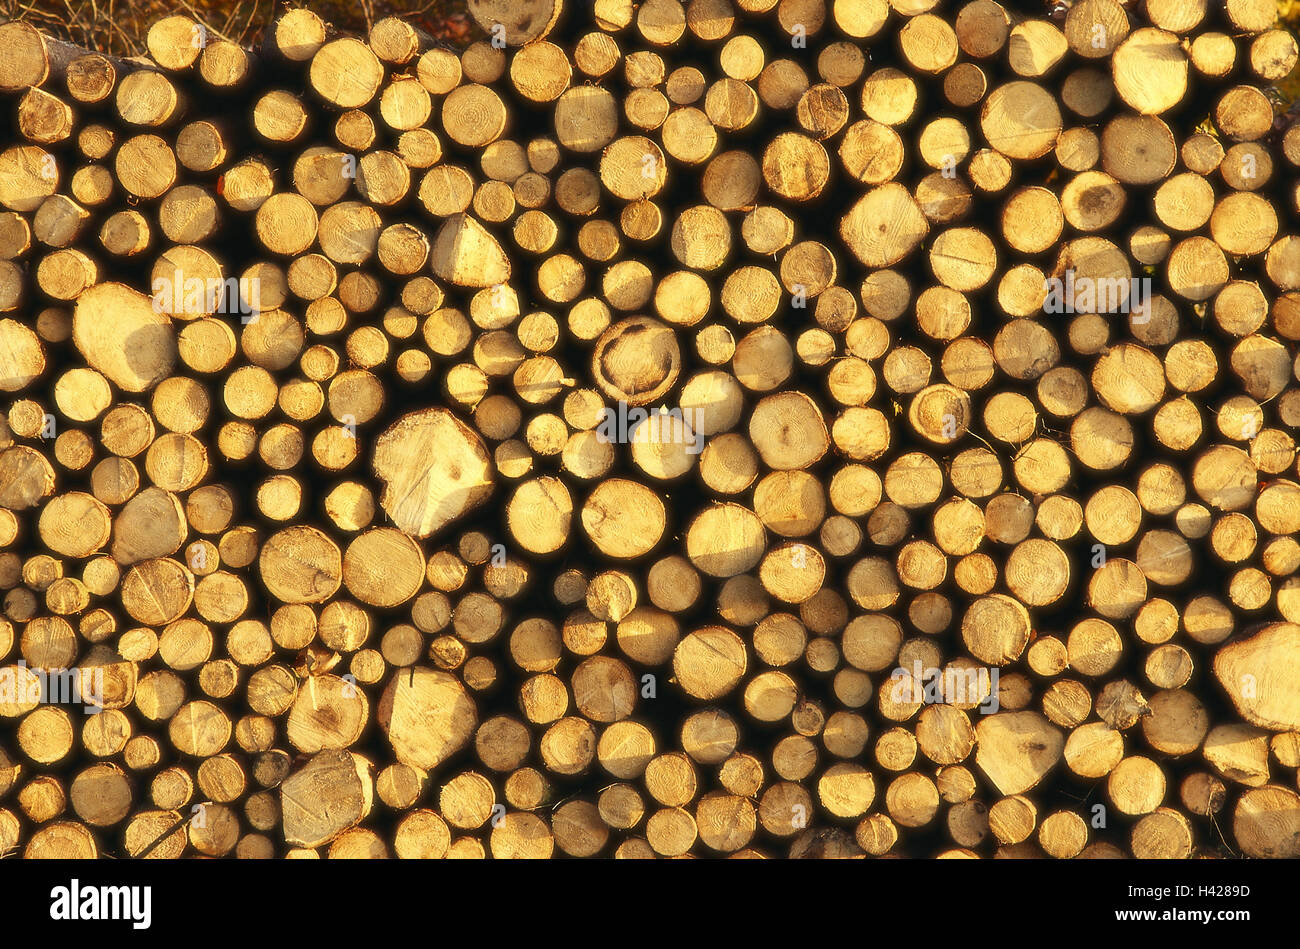 Forestry, tree-trunks, stacked,  Detail, cuts,   Trees, pleased, trunks, storage, symbol, abforsten, forest, concept, wood, firewood, lumber, fuel, storage, wood industry, paper industry, heating, Einheizen, energy supplier, natural, deforestation, cleara Stock Photo